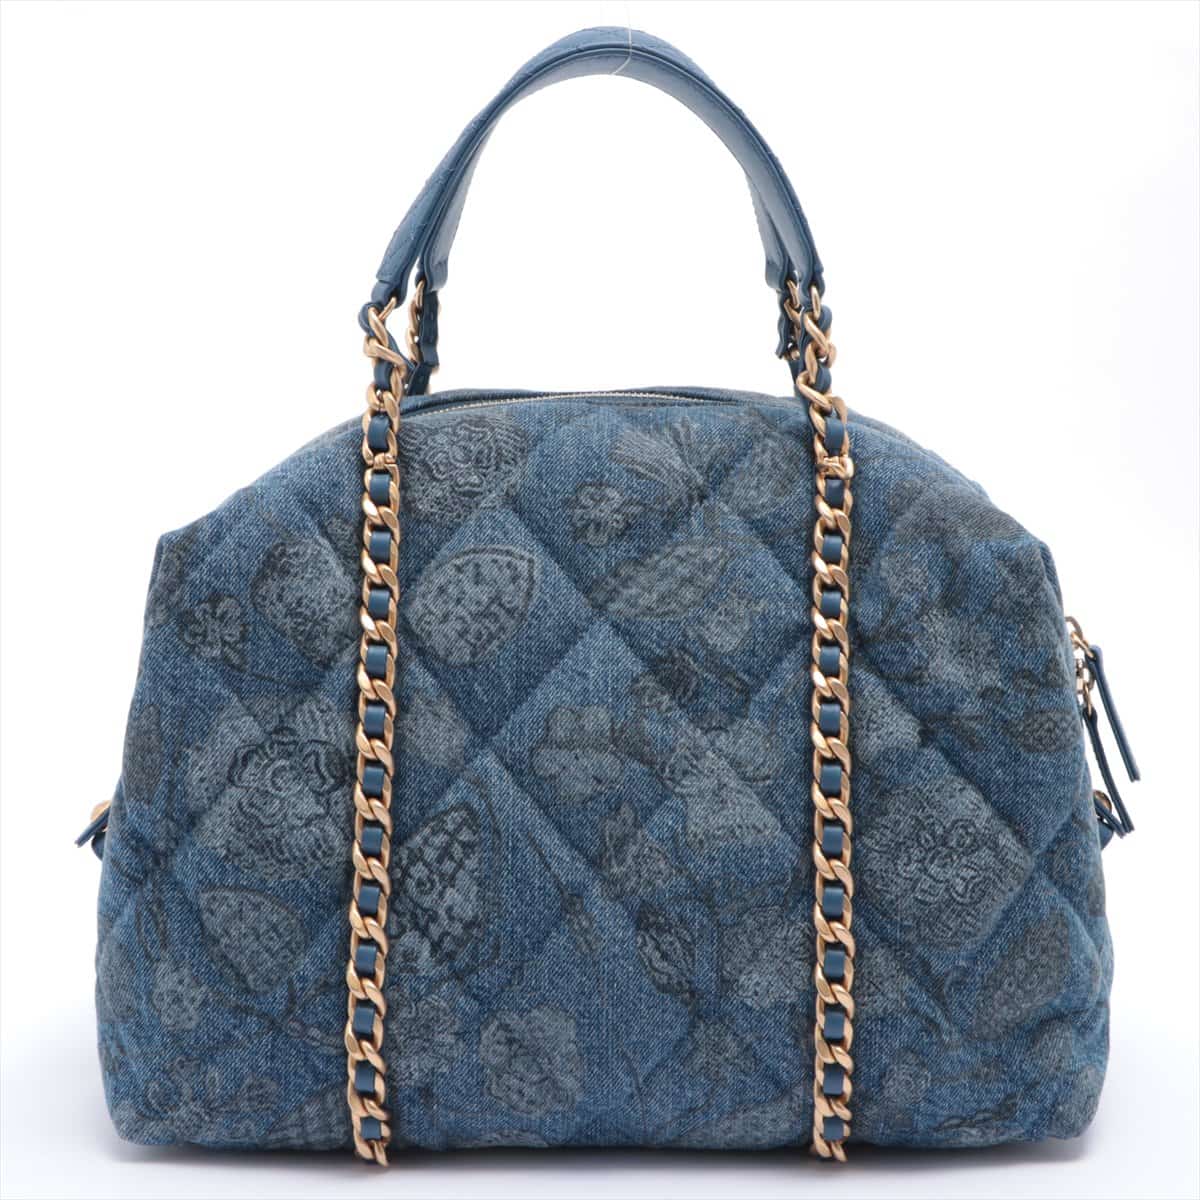 Chanel Matelasse Denim 2way handbag Blue Champagne gold hardware There is an IC chip